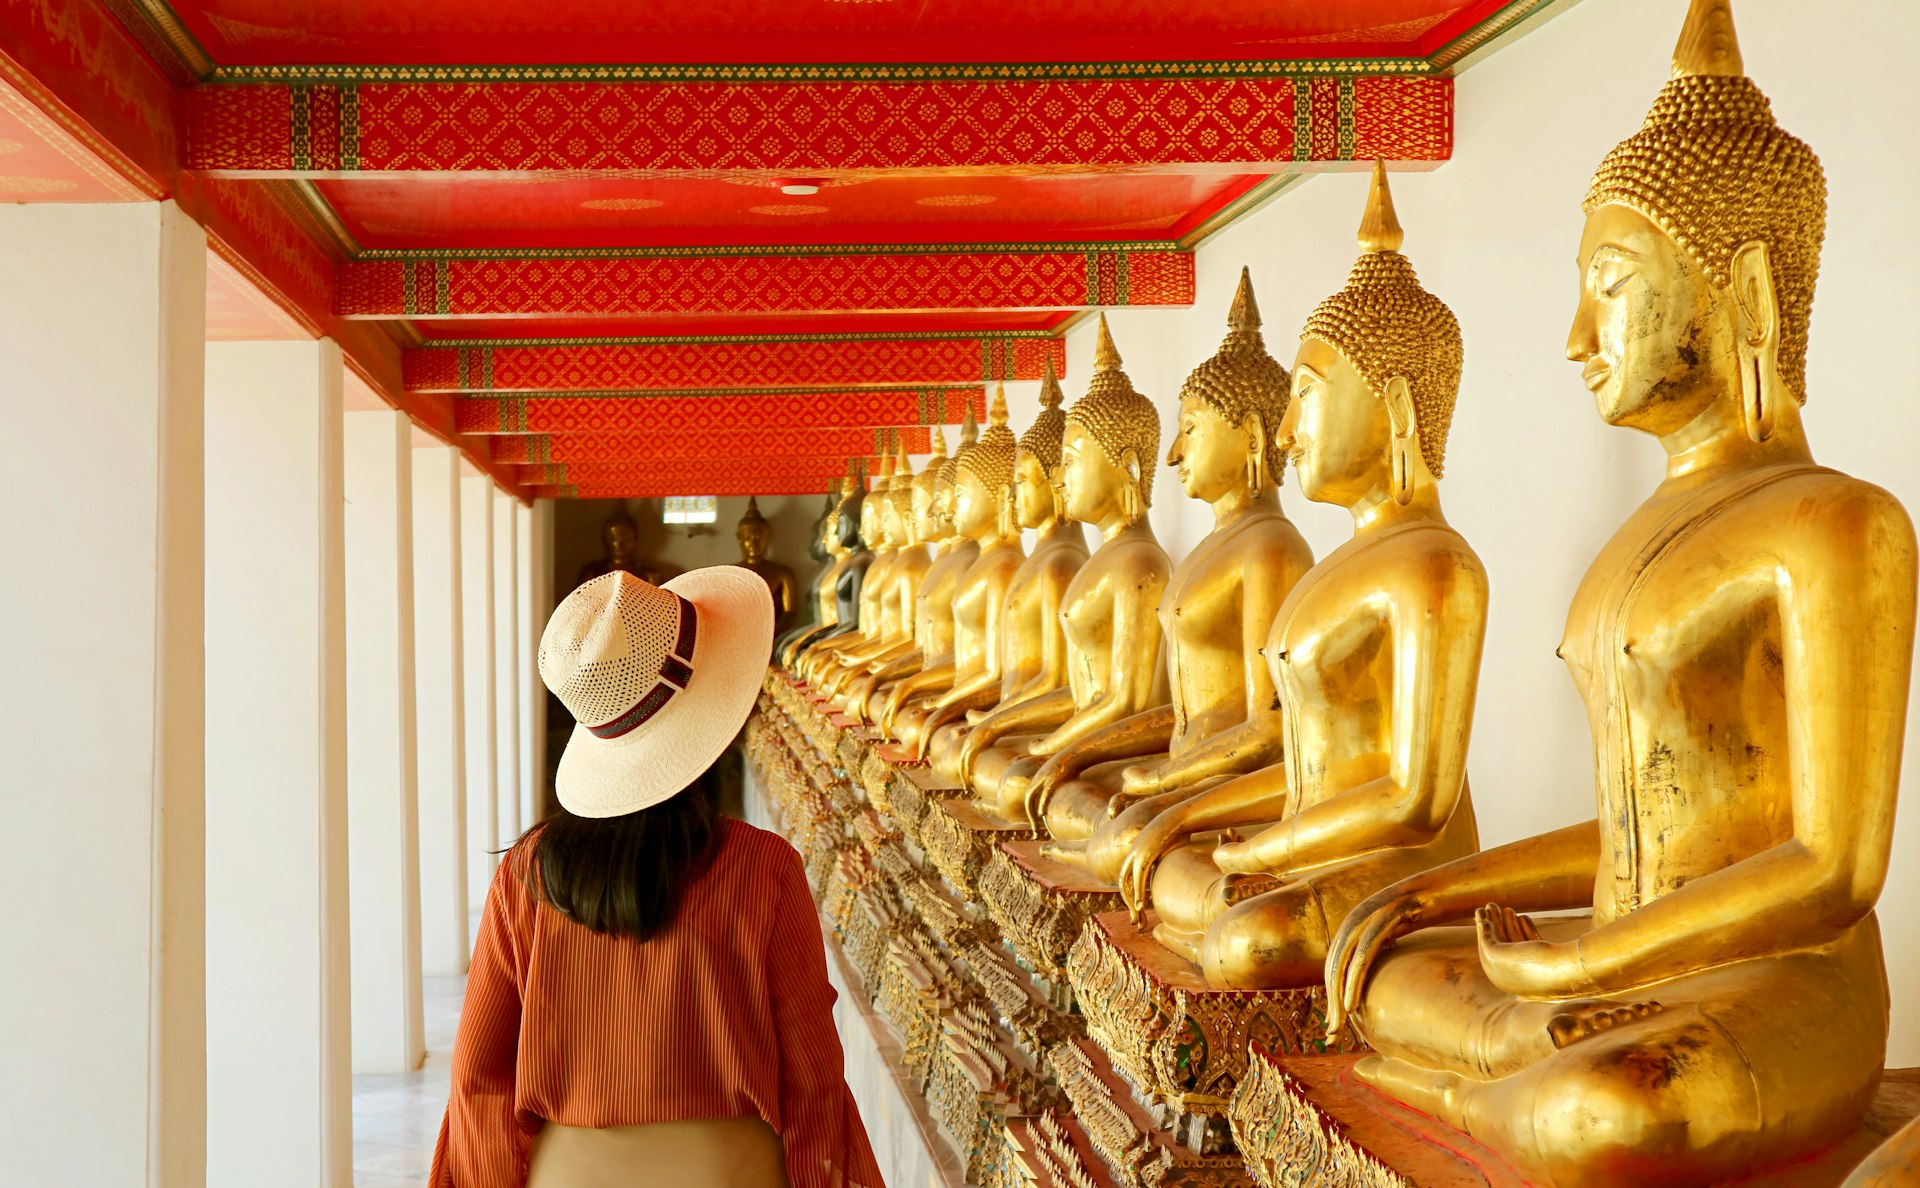 A woman wearing clothes that cover her shoulders walks along a wall of golden buddhas in a Thai temple